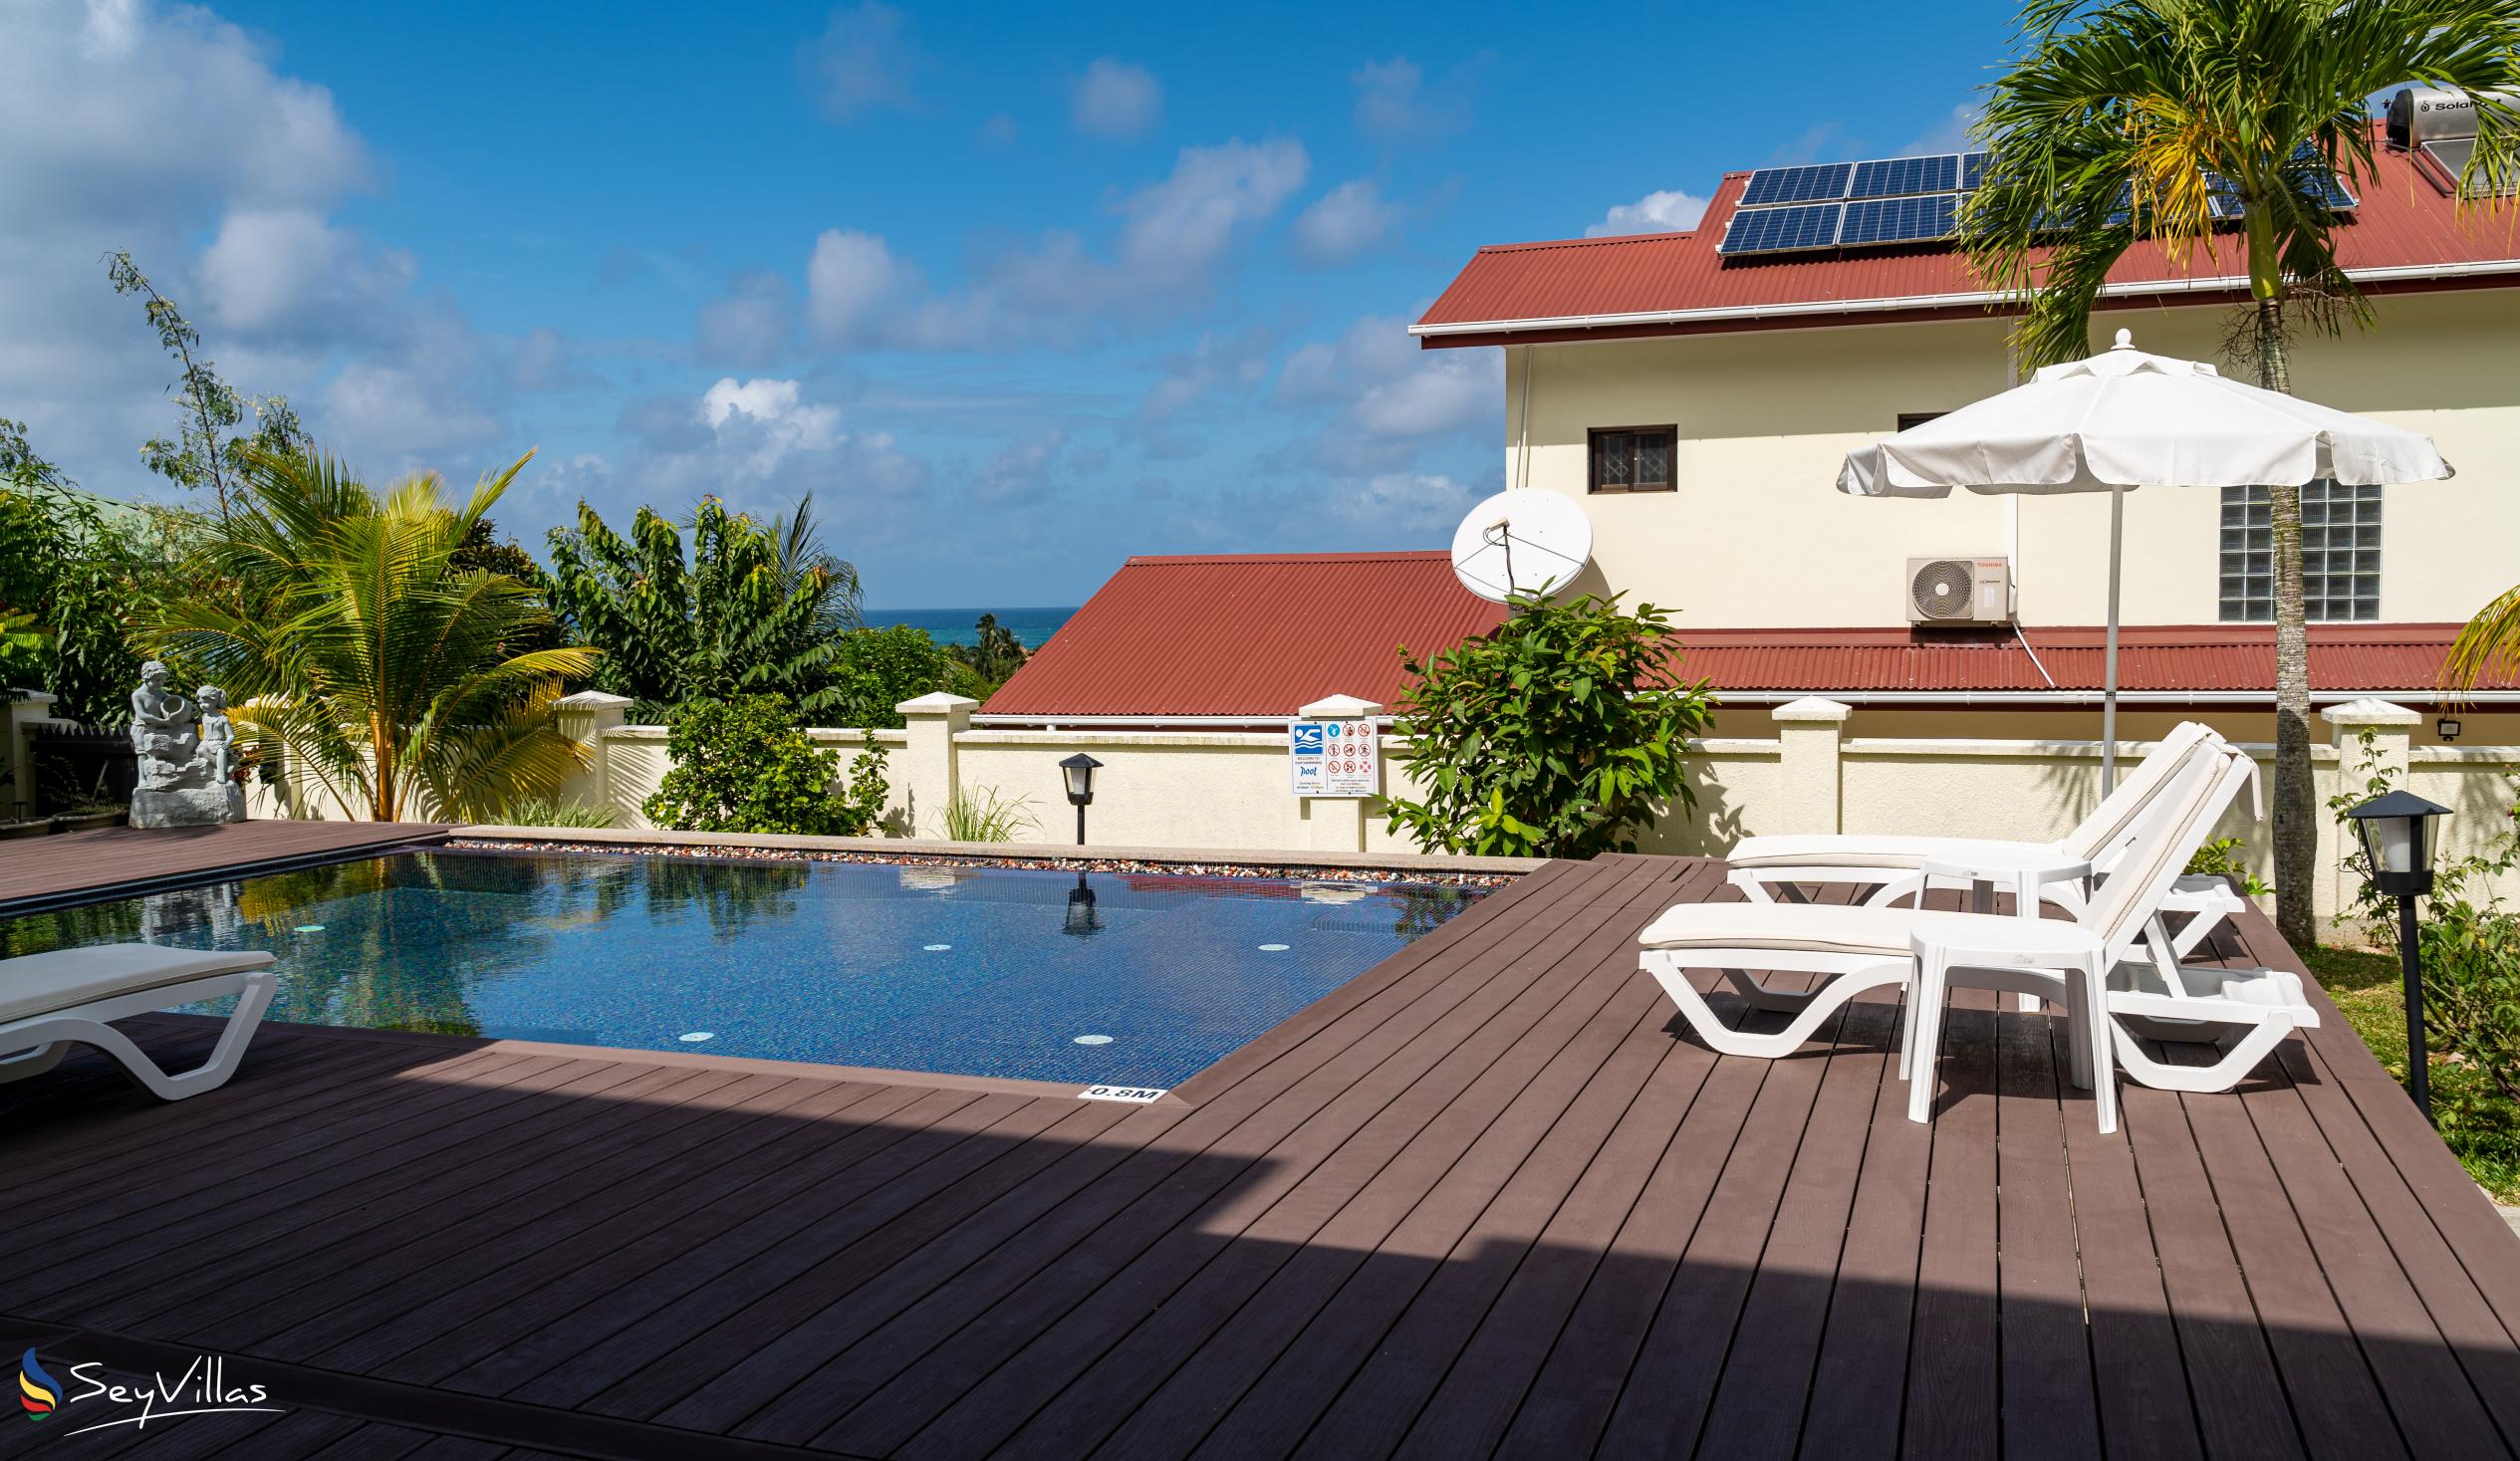 Photo 3: Emma's Guest House and Self-Catering - Outdoor area - Mahé (Seychelles)